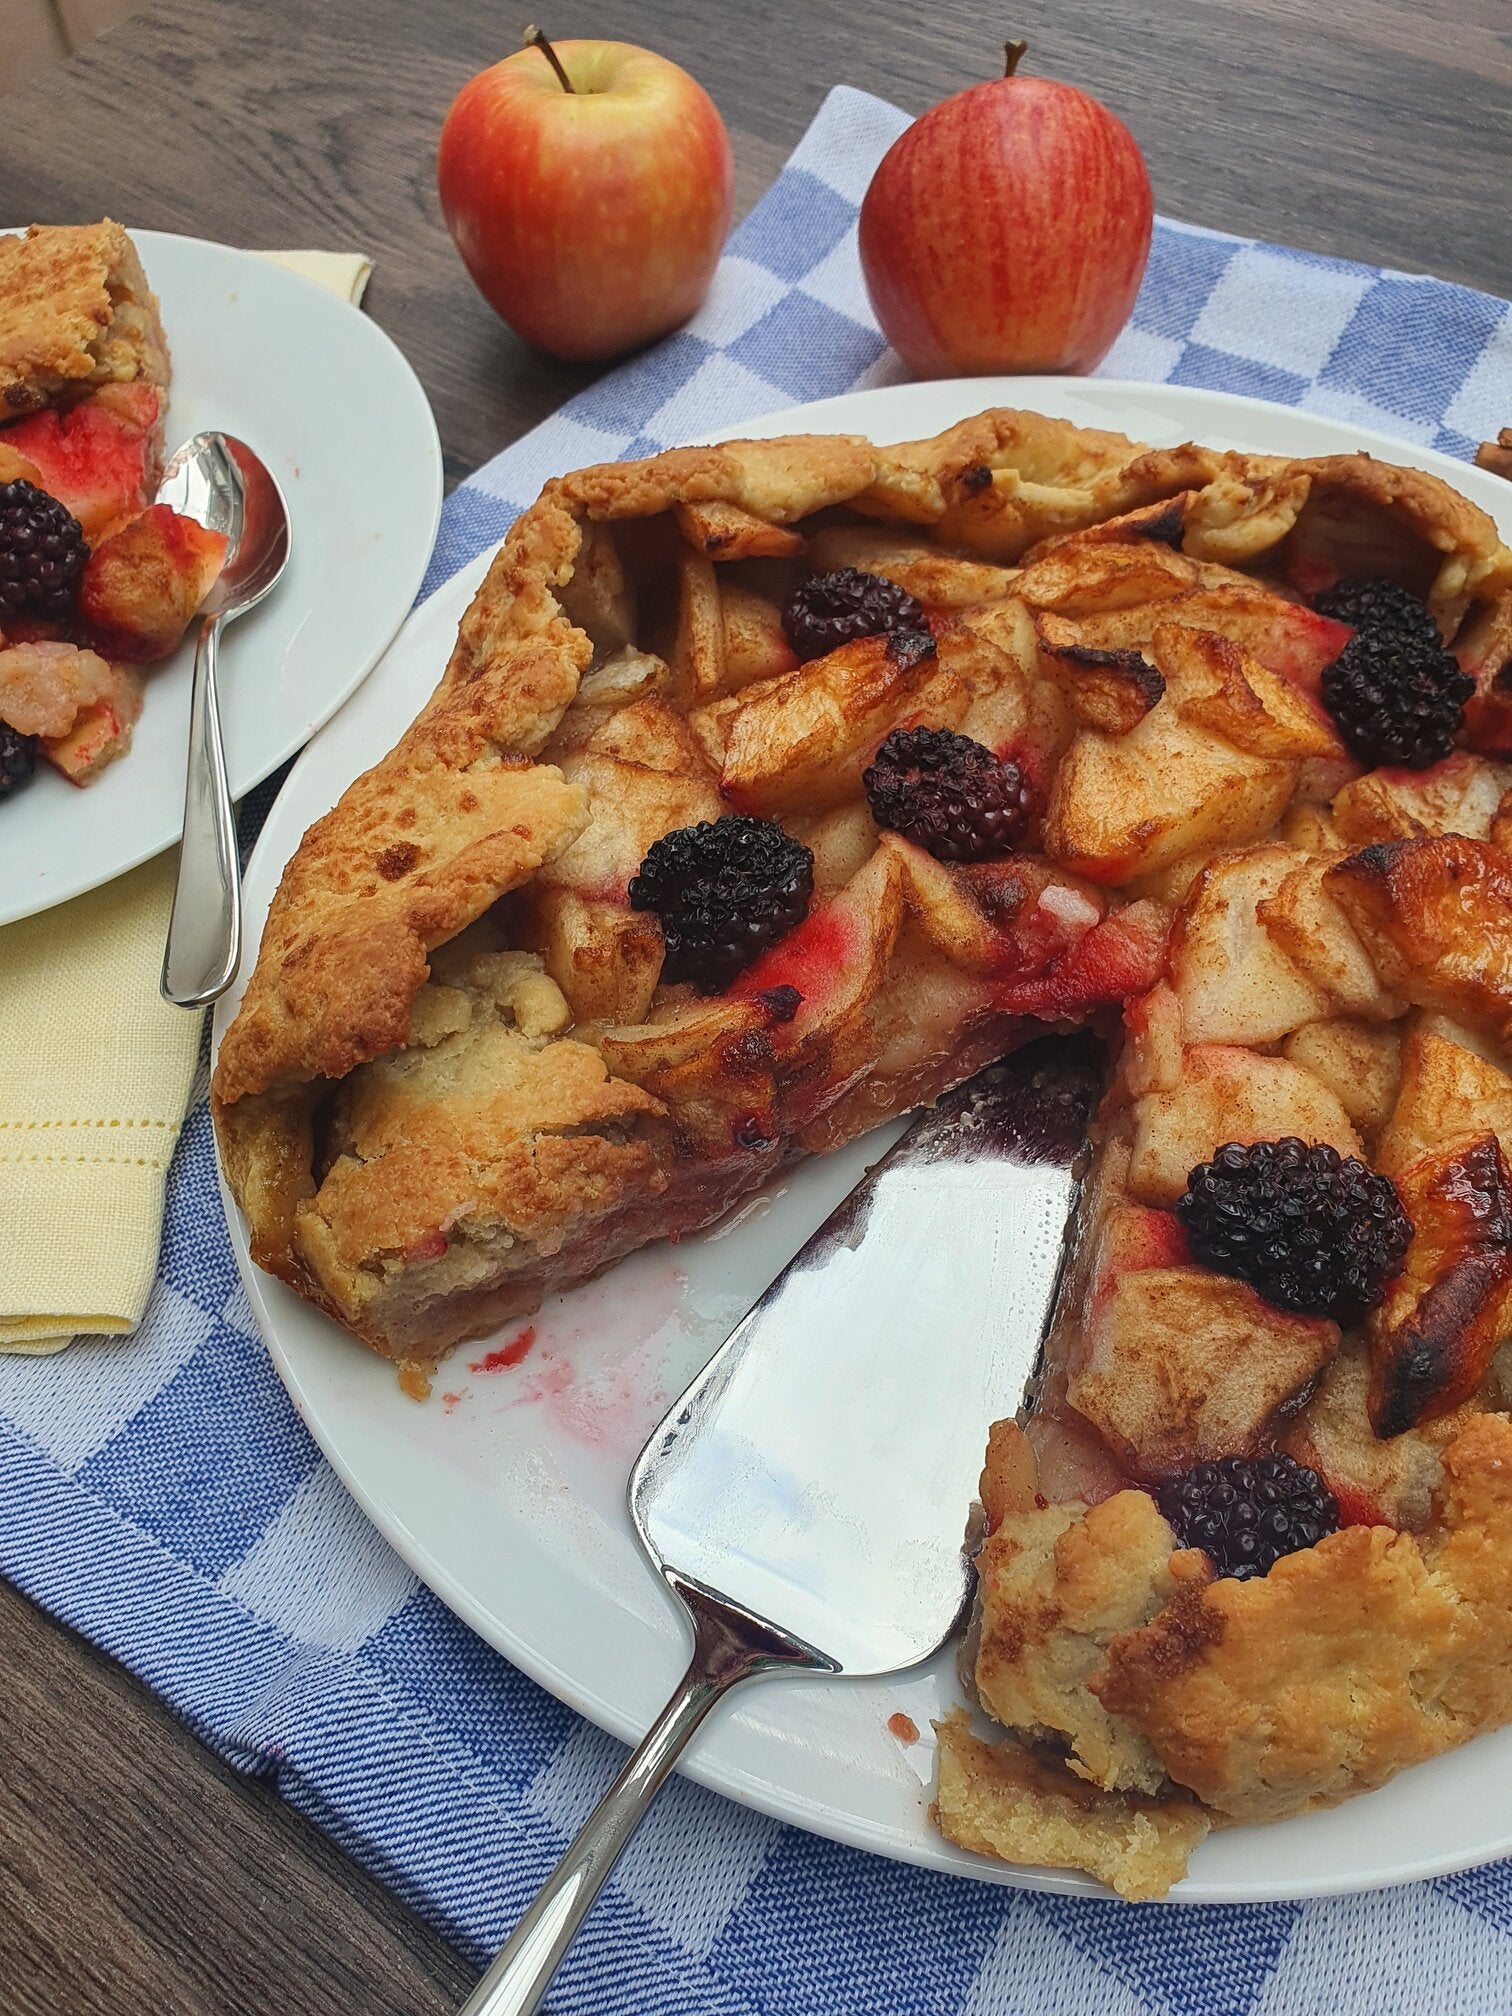 Apple galette with an olive oil crust